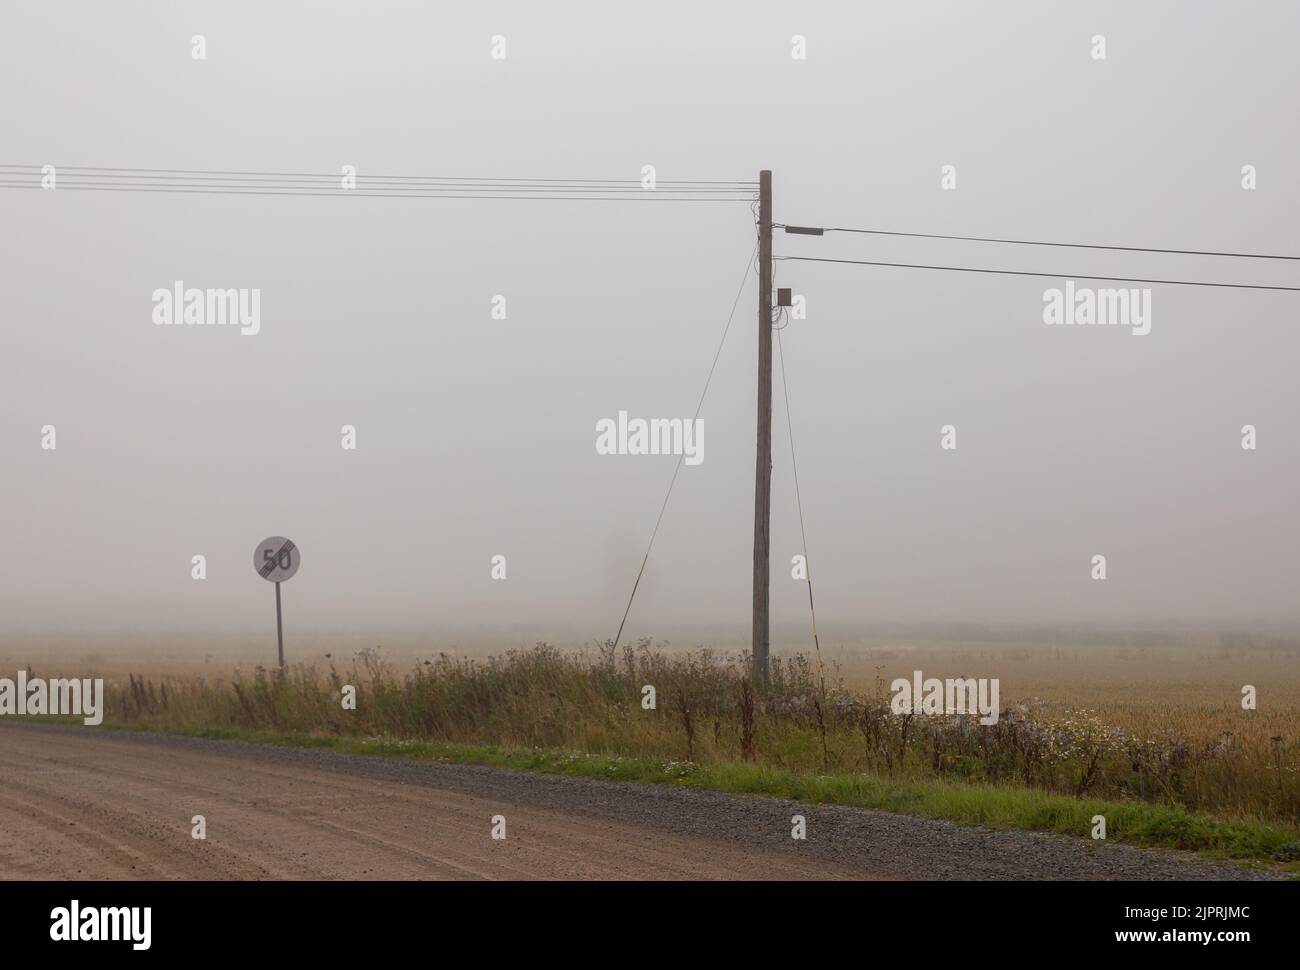 A foggy morning in the countryside in Finland. An old telephone pole with an air wire. Quiet village road, speed limit sign. Stock Photo